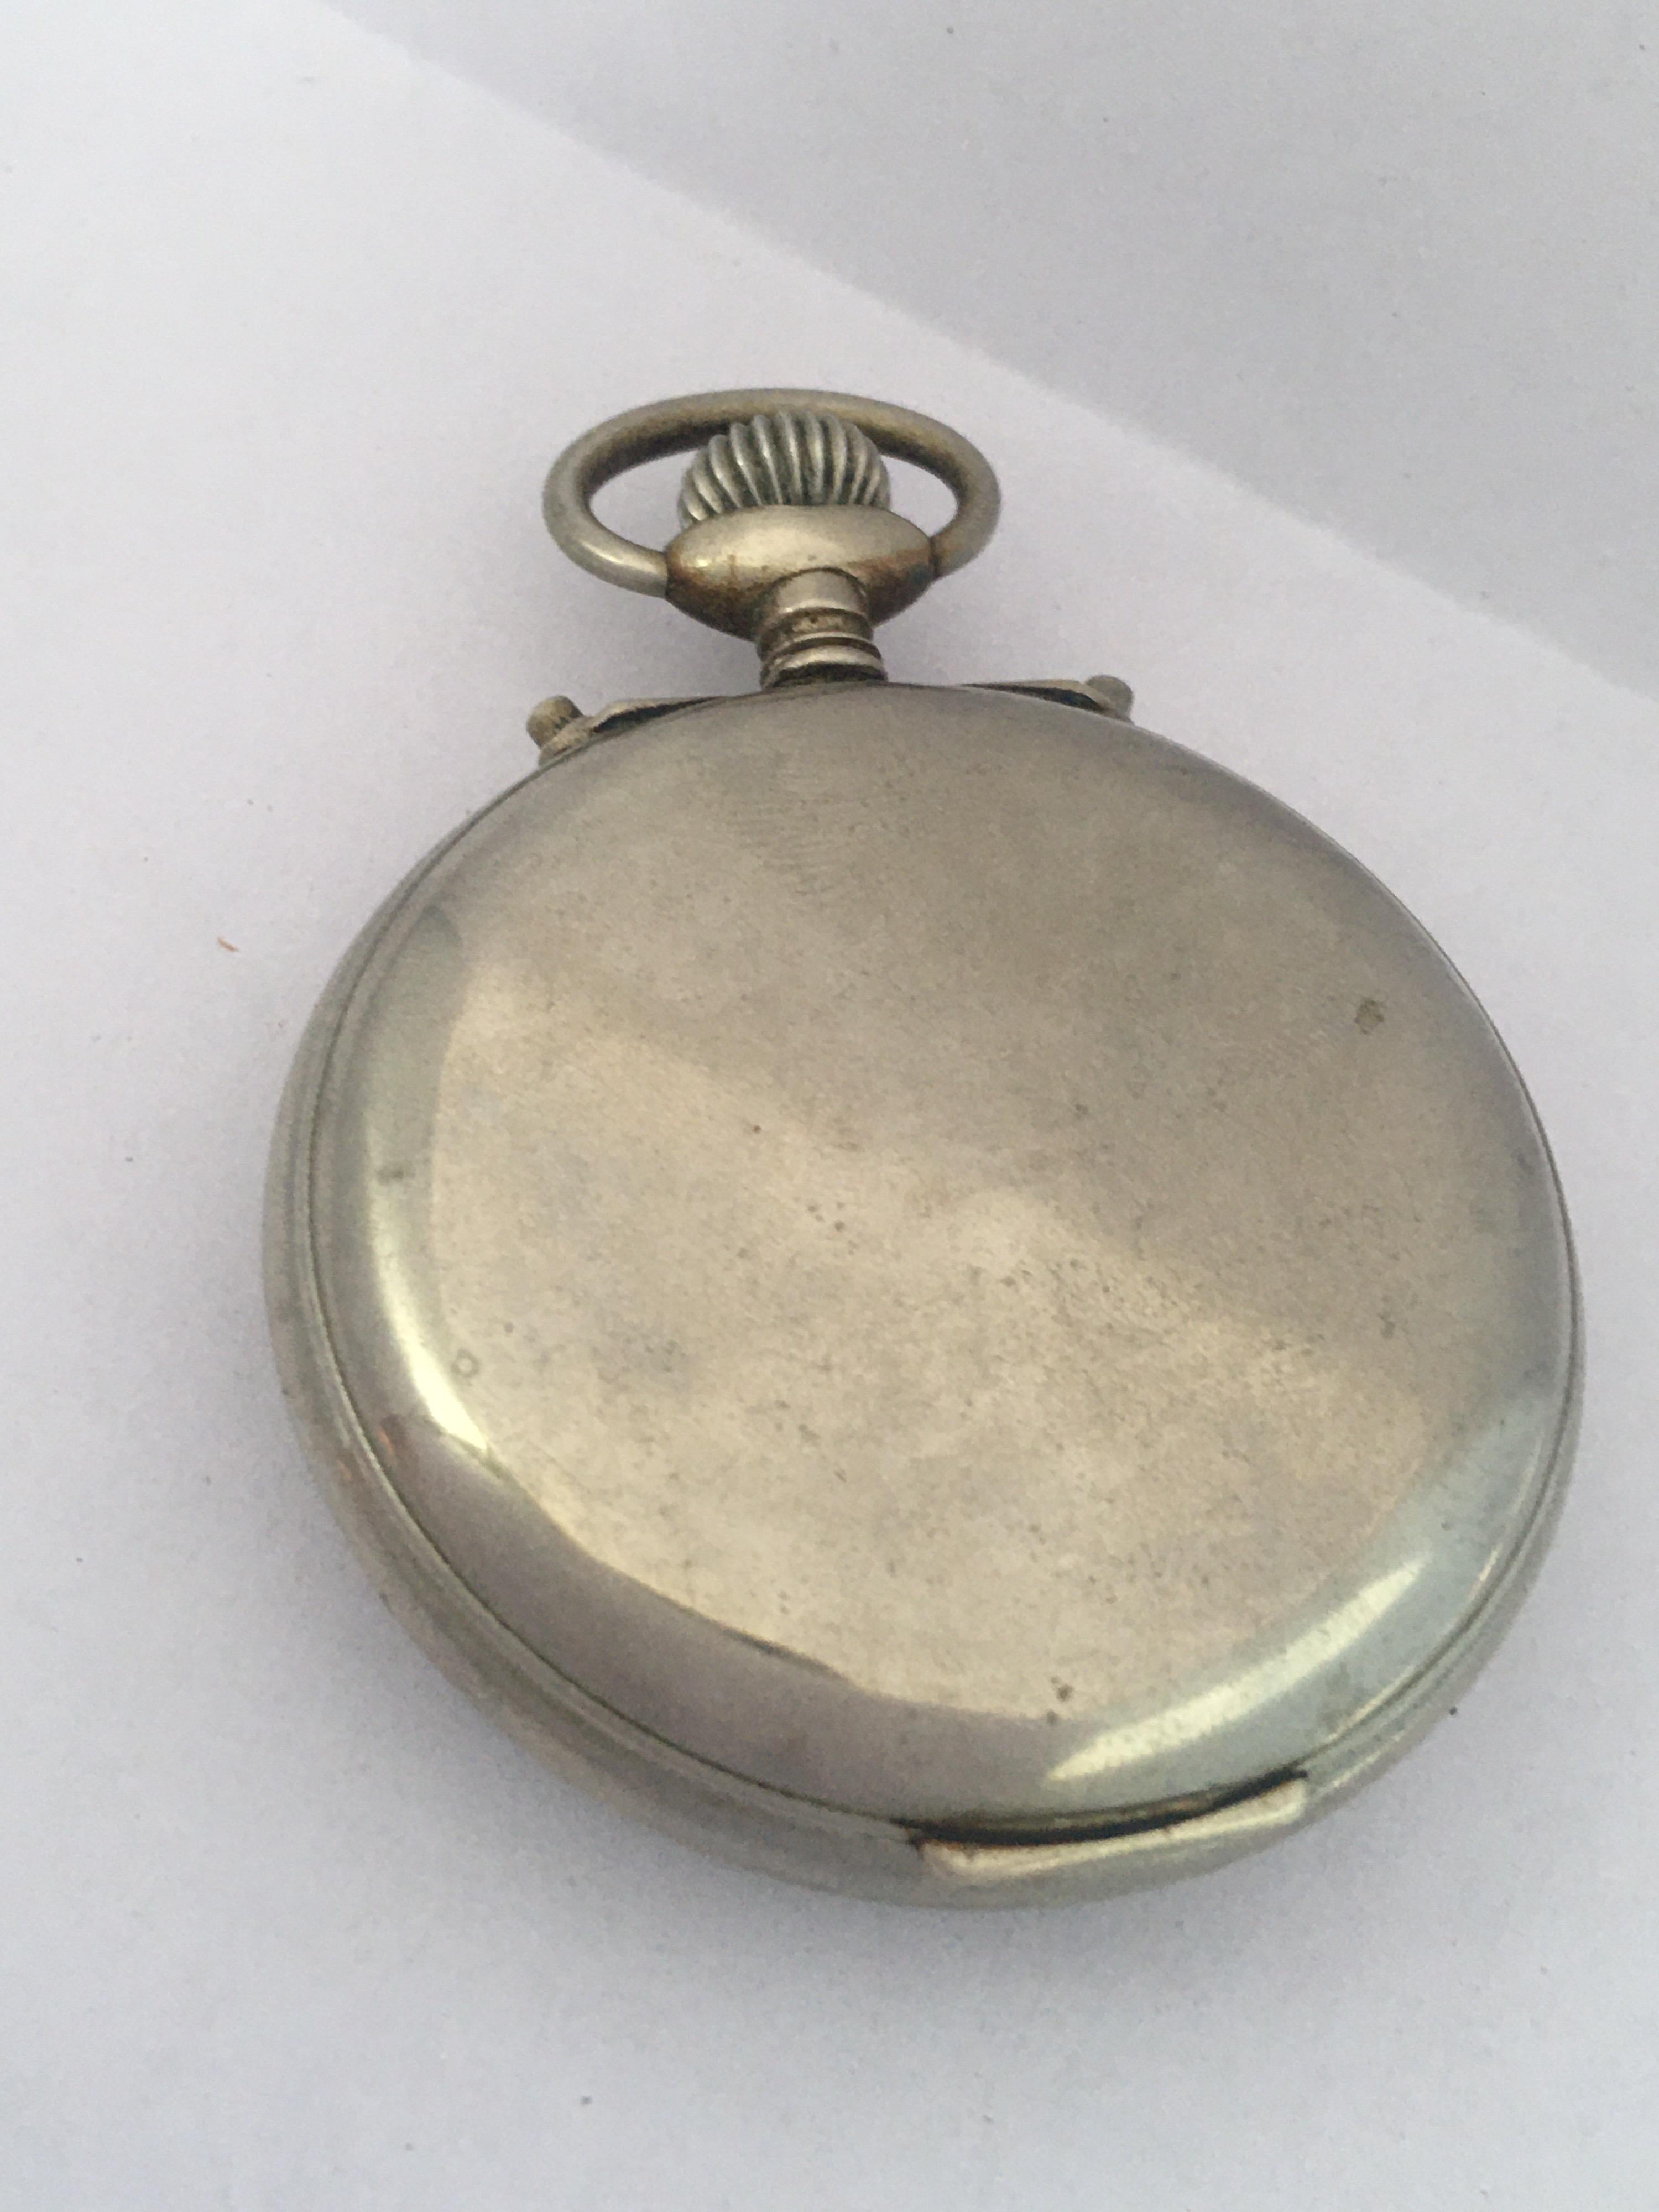 This beautiful antique hand winding alarm pocket watch is in good working condition and it is running well. the alarm functioning well. Visible signs of ageing and wear with light surface marks on the on the  watch case. Tiny hairline crack on the